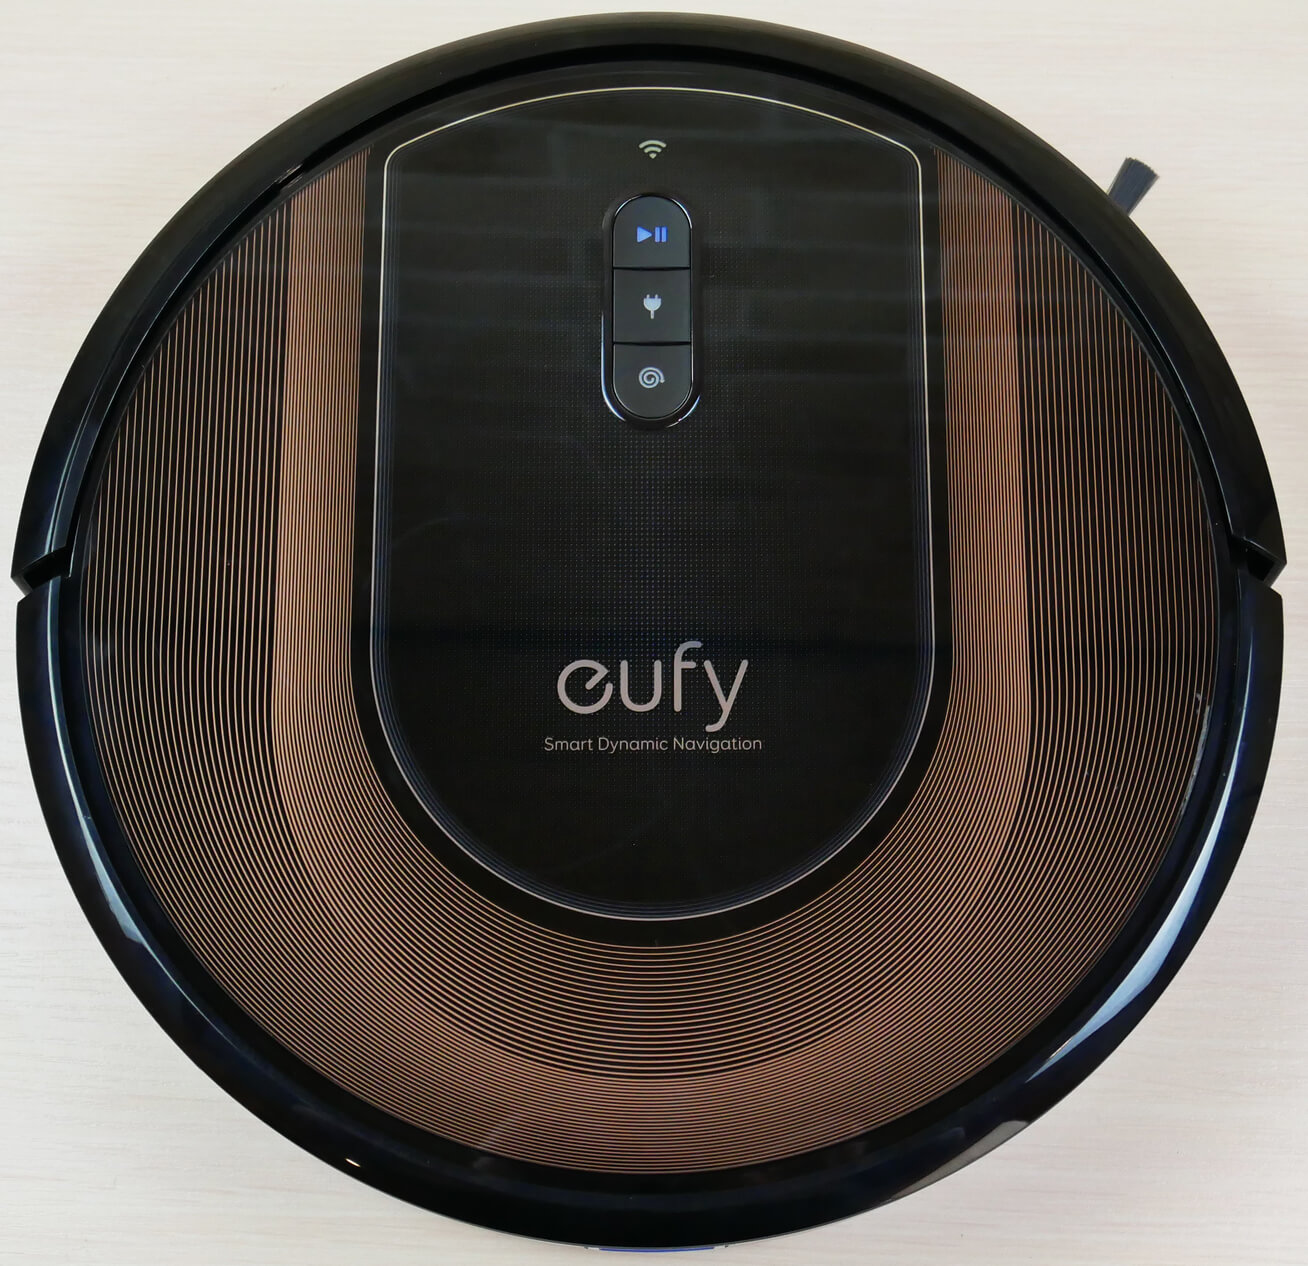 opinion RoboVac personal test, Eufy Hybrid: review, G30